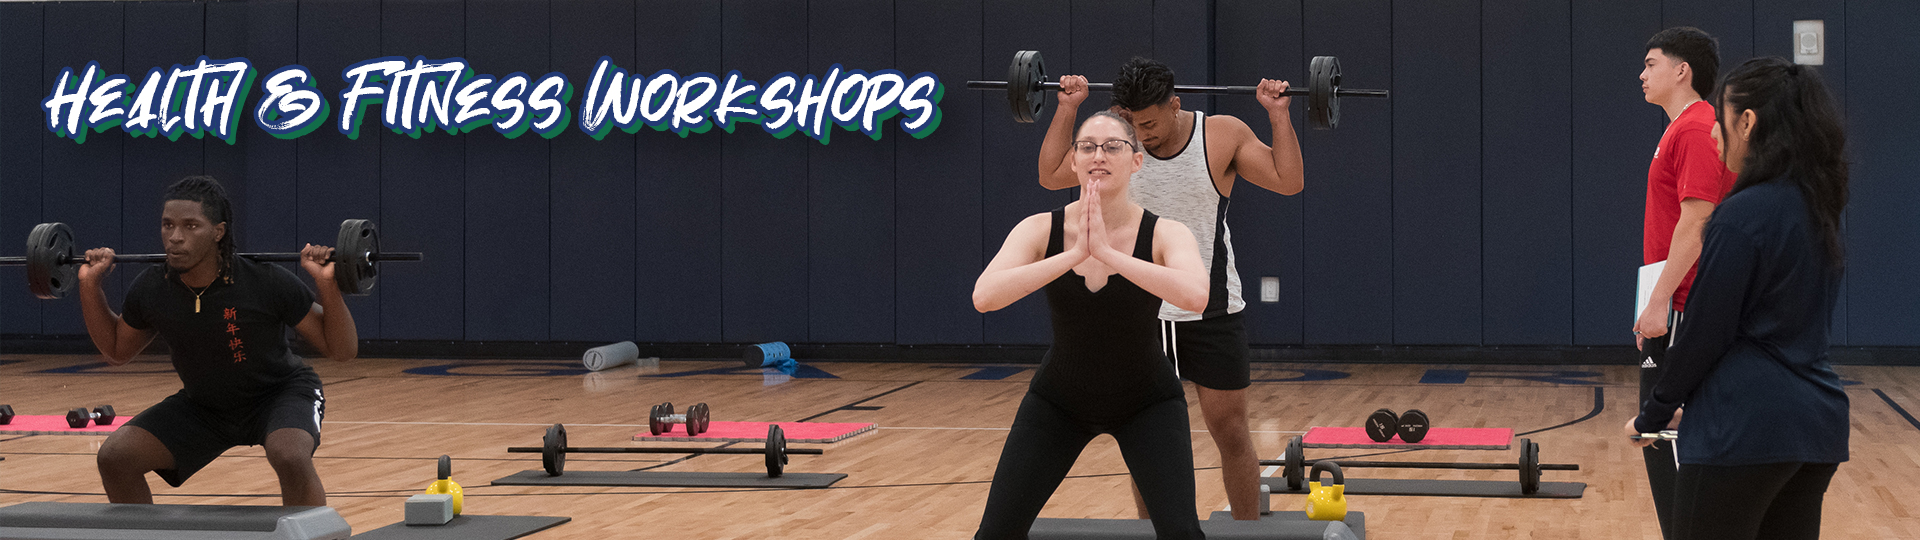 Health and Fitness Workshops for Healthy Minded Members